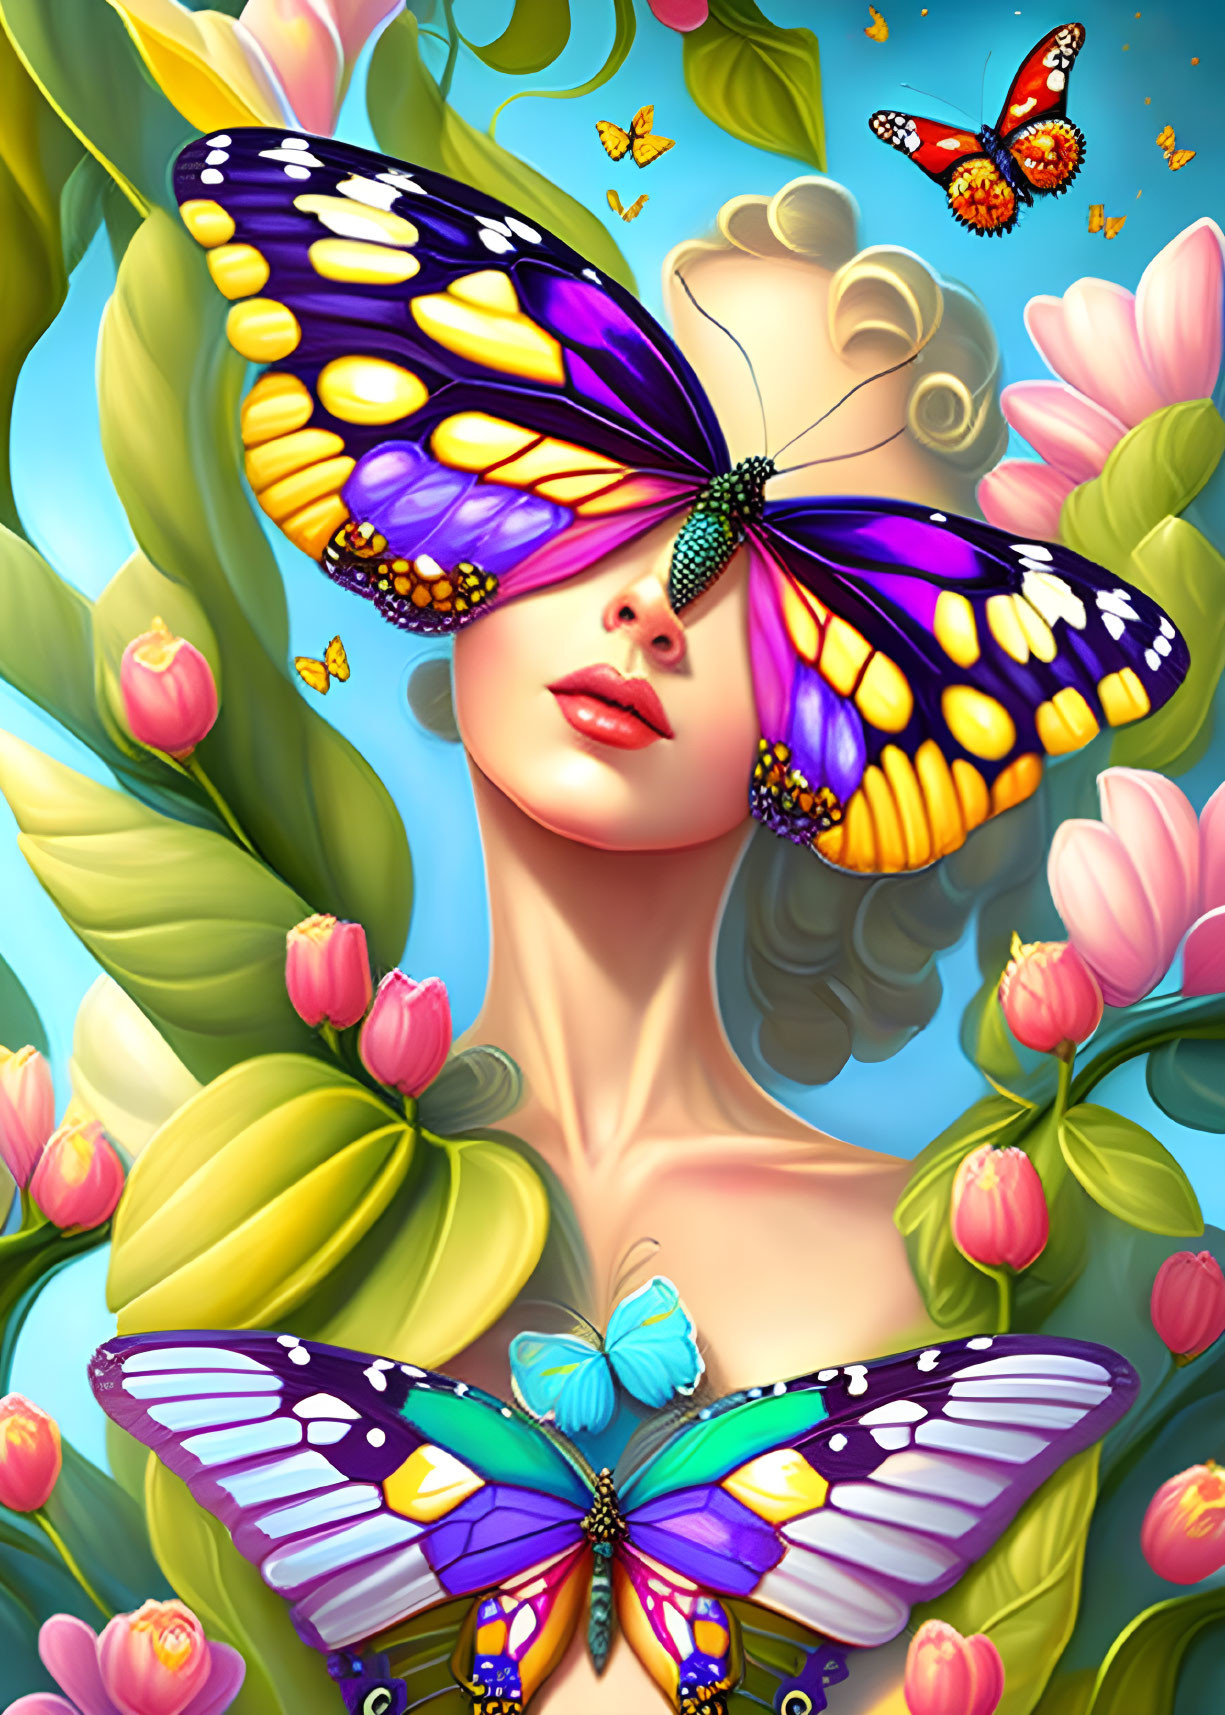 Colorful Artwork of Woman with Butterflies and Flowers on Blue Sky Background